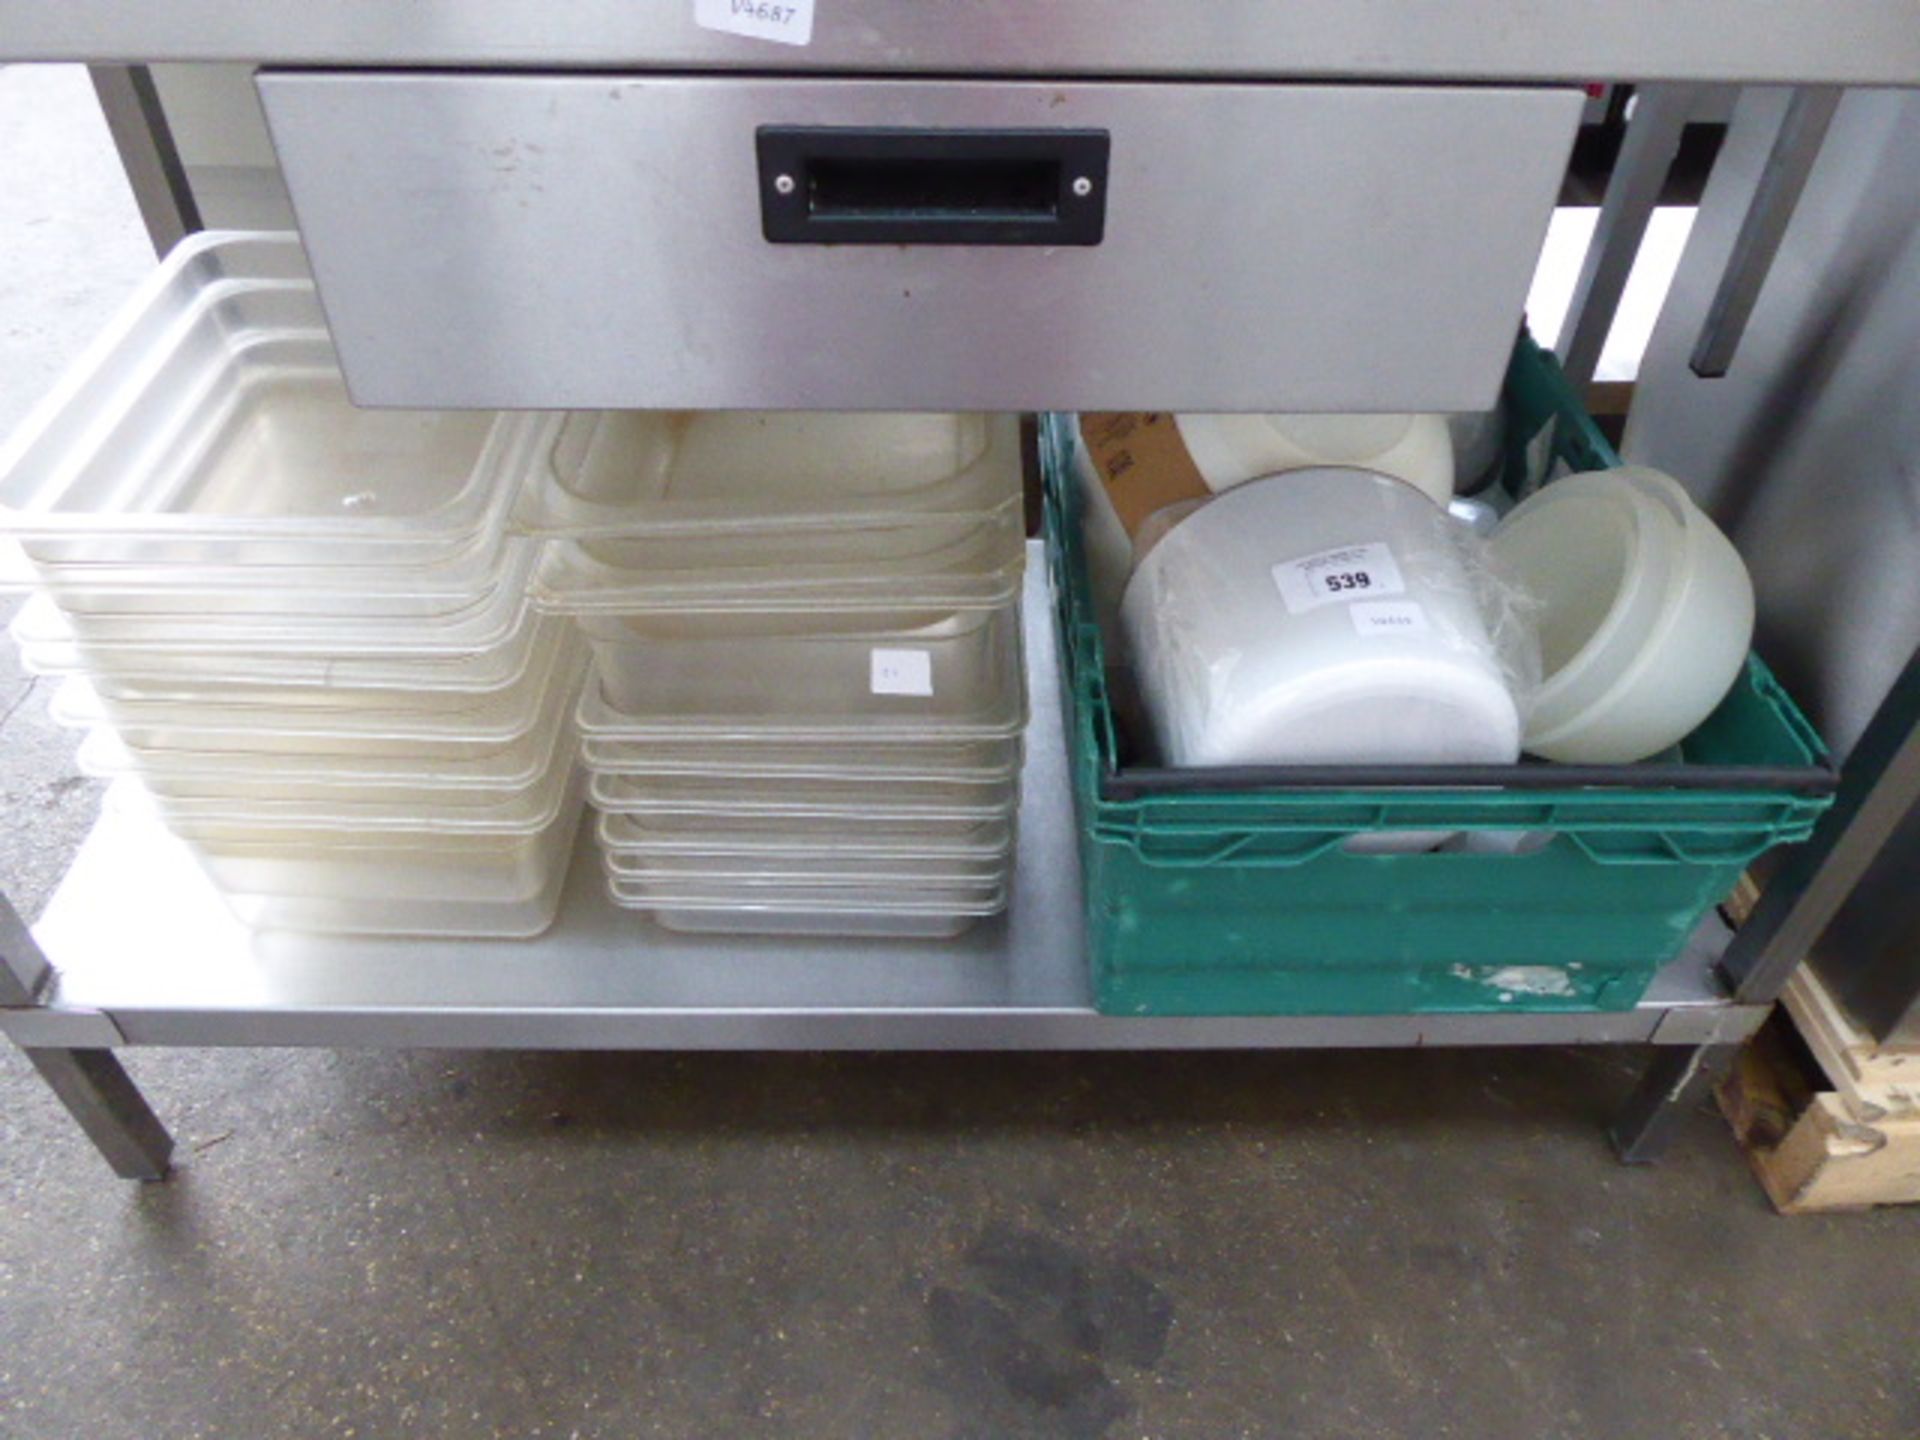 2 stacks of half size plastic gastronorm containers and a crate of assorted plastic wares